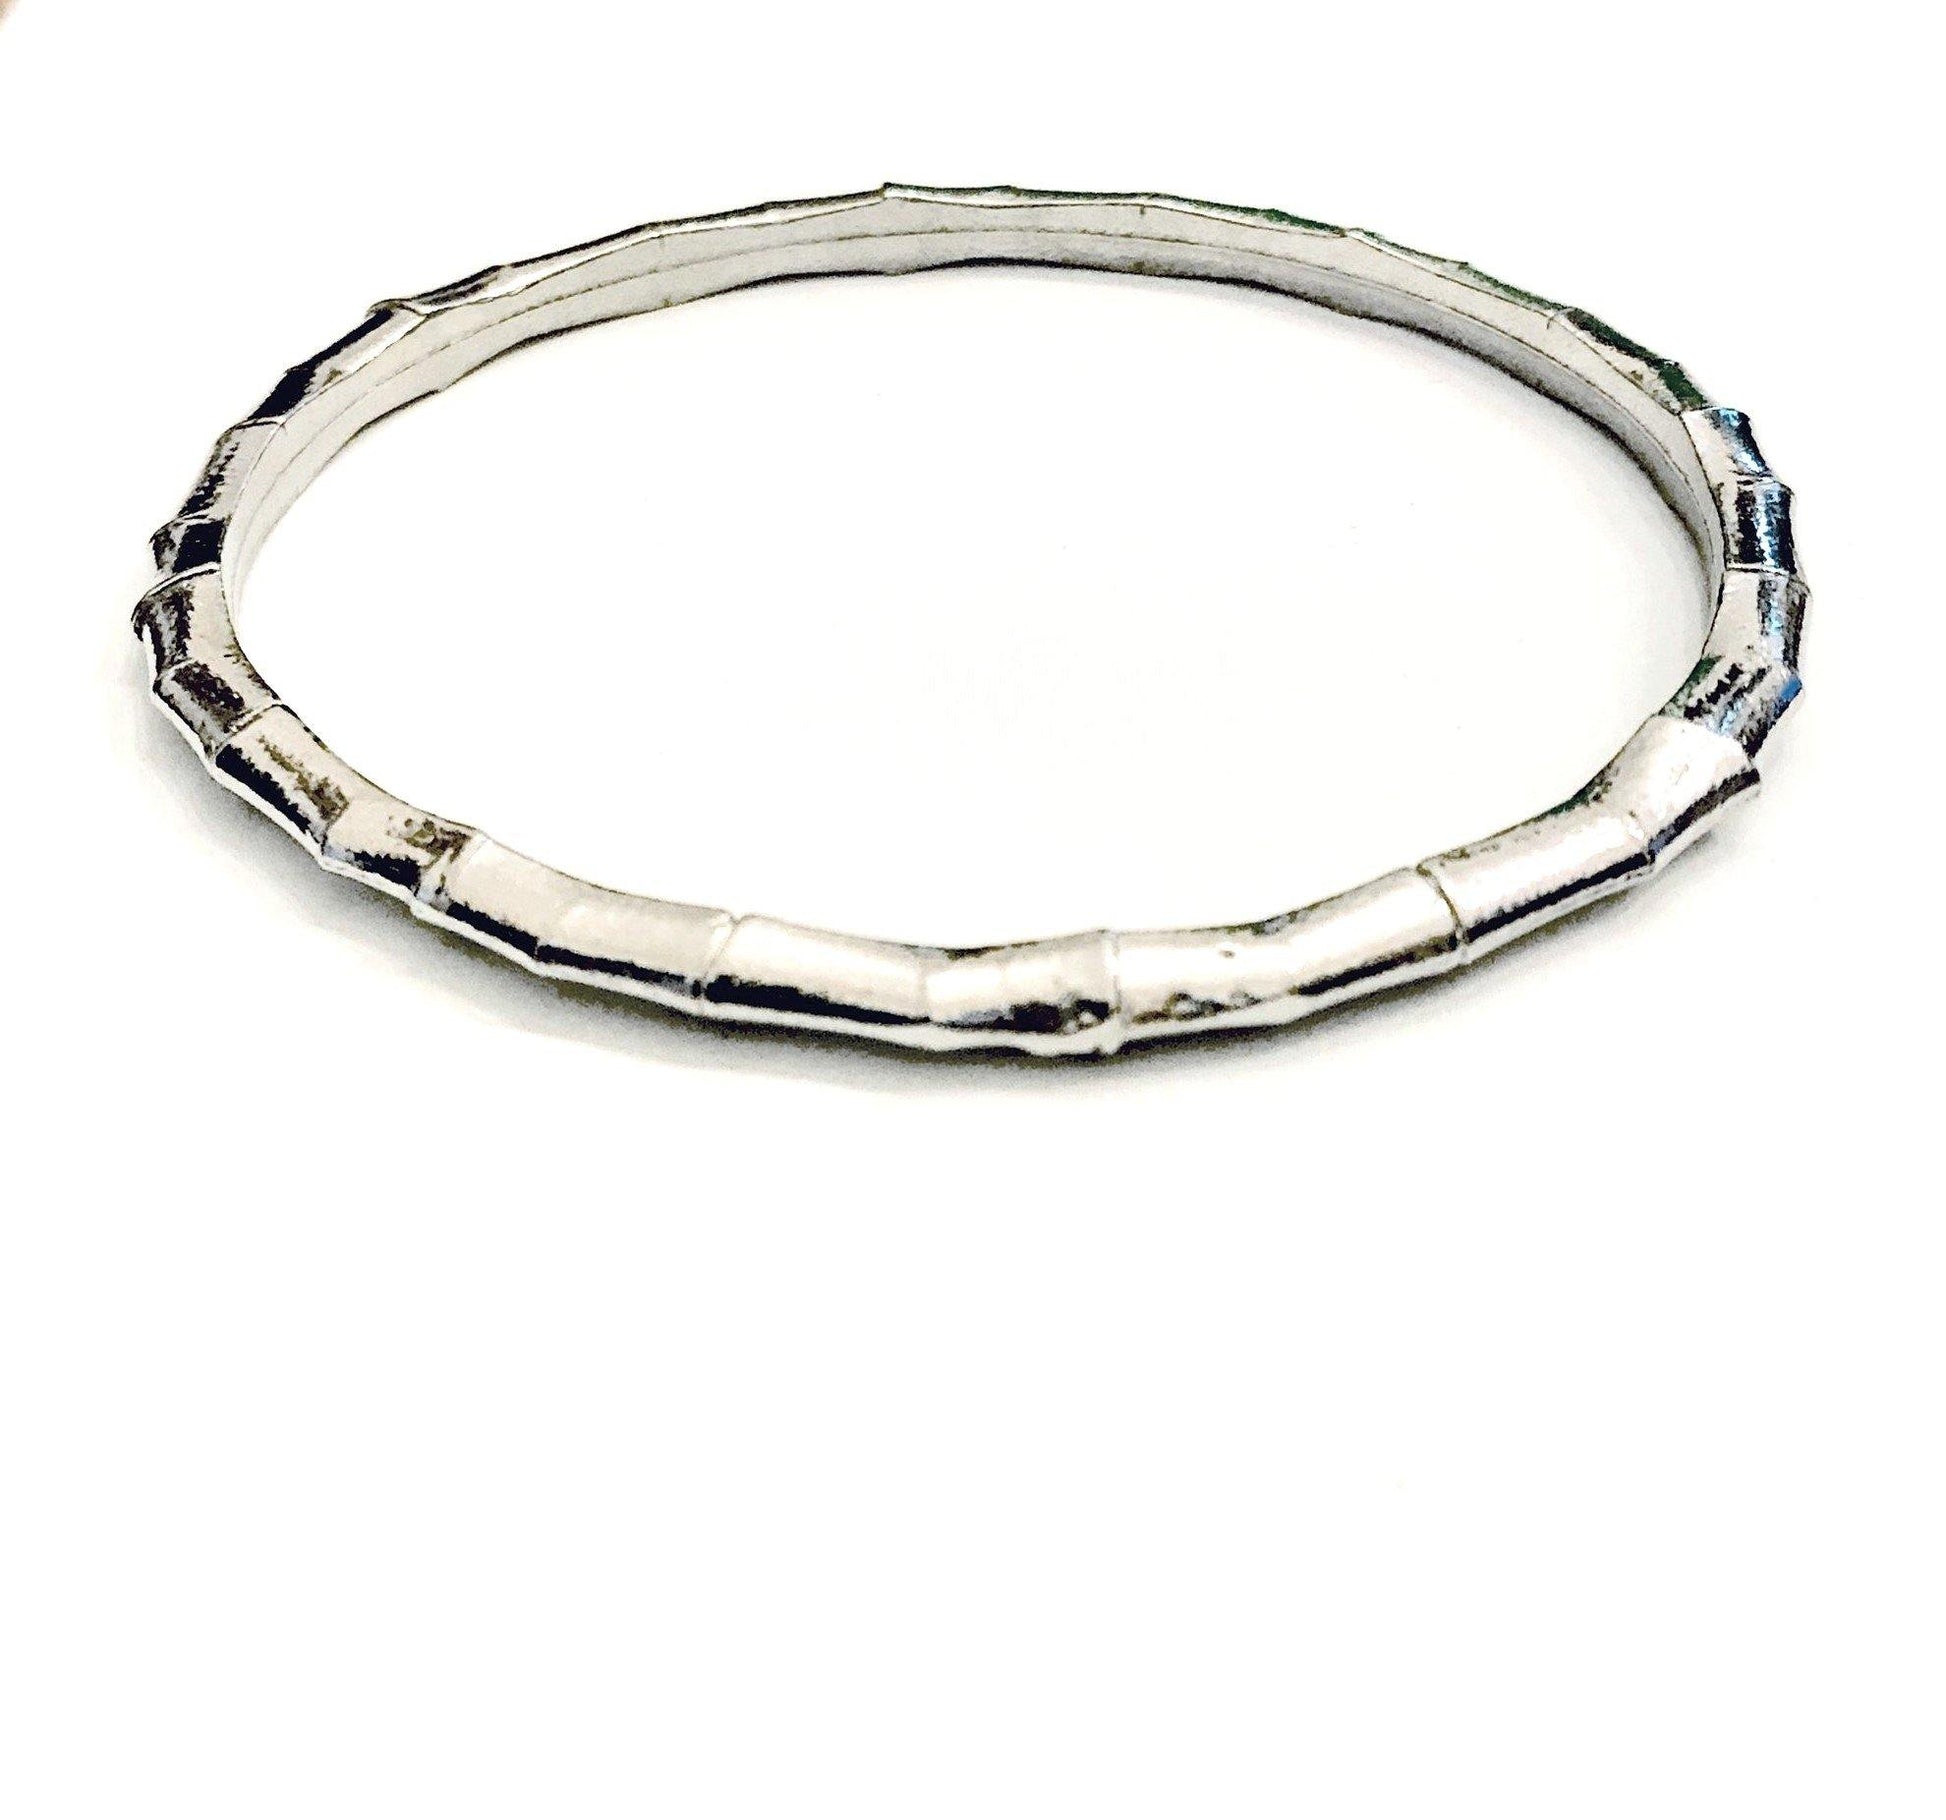 Fine Pewter Bamboo Inspired Bracelet Bangle Jewelry 8" Circumference - House of Morgan Pewter